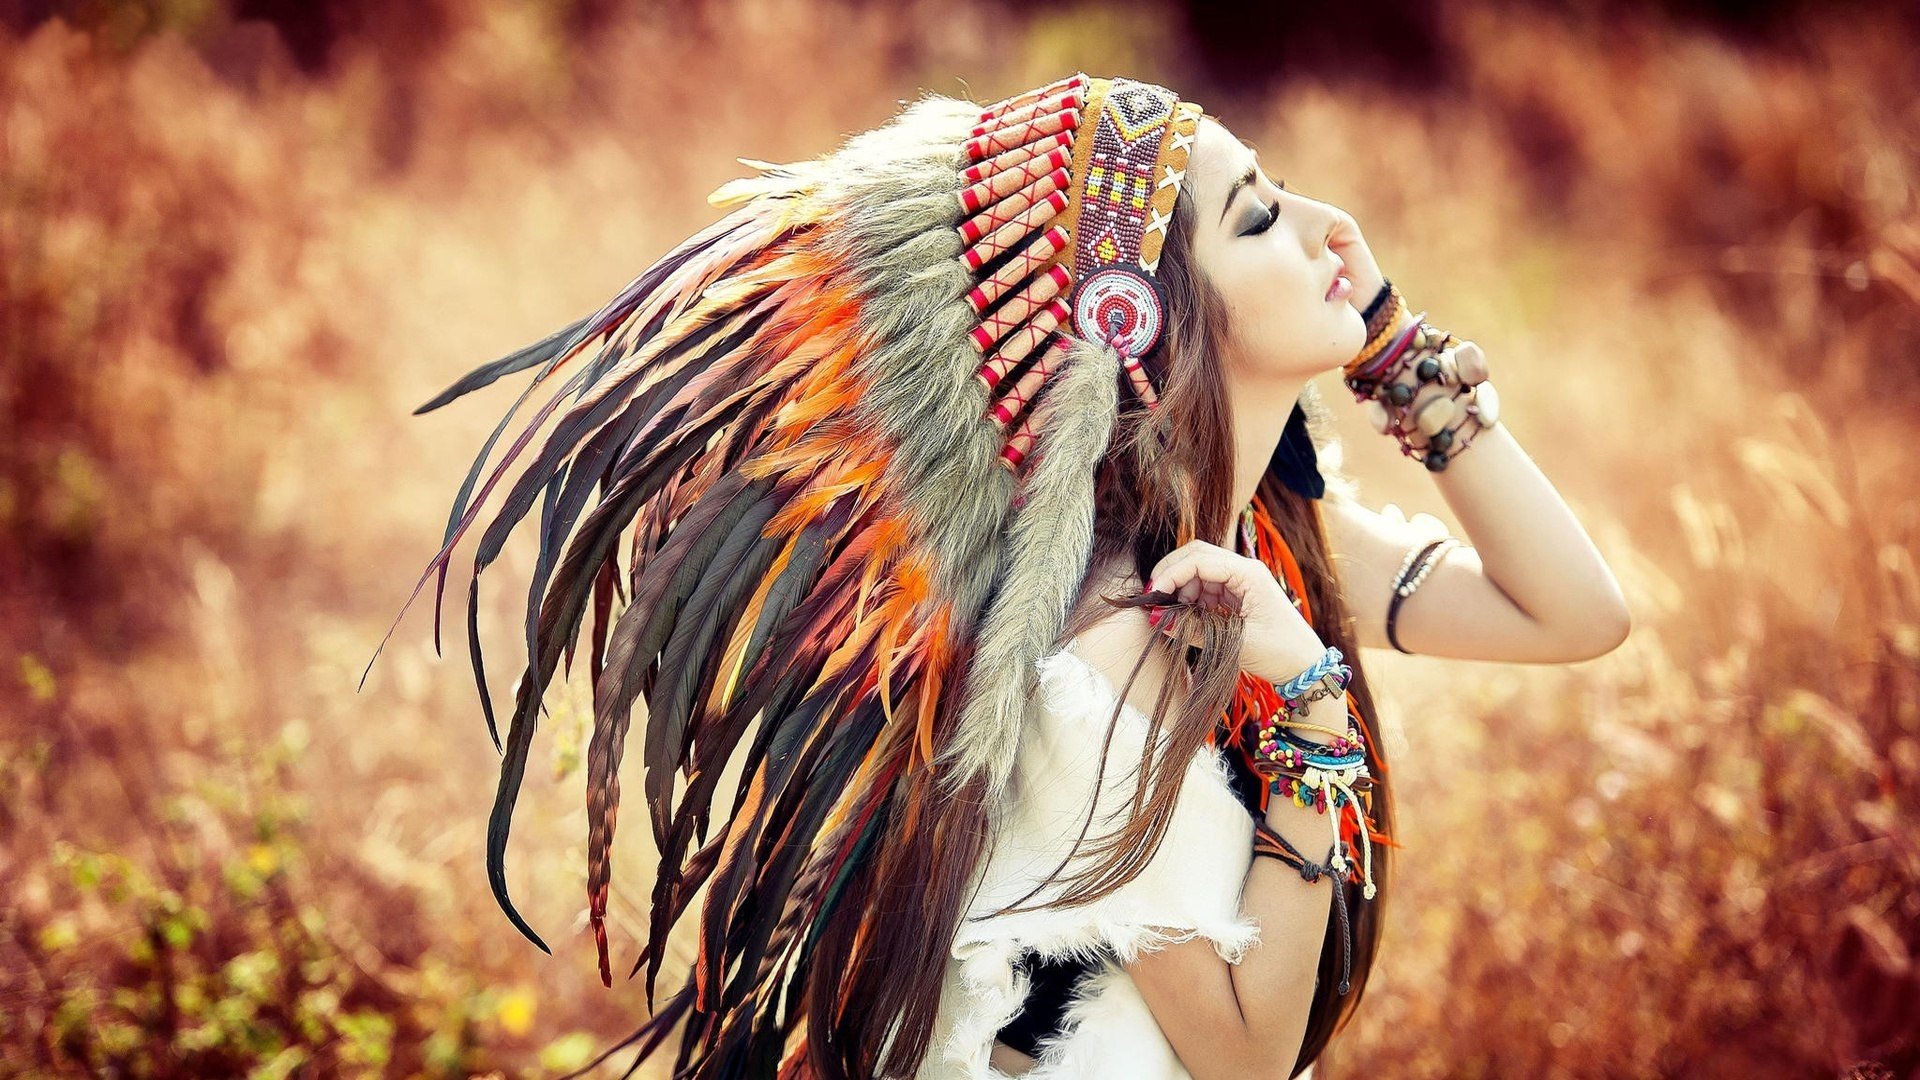 Red Indian Girl Hd - 1920x1080 Wallpaper 